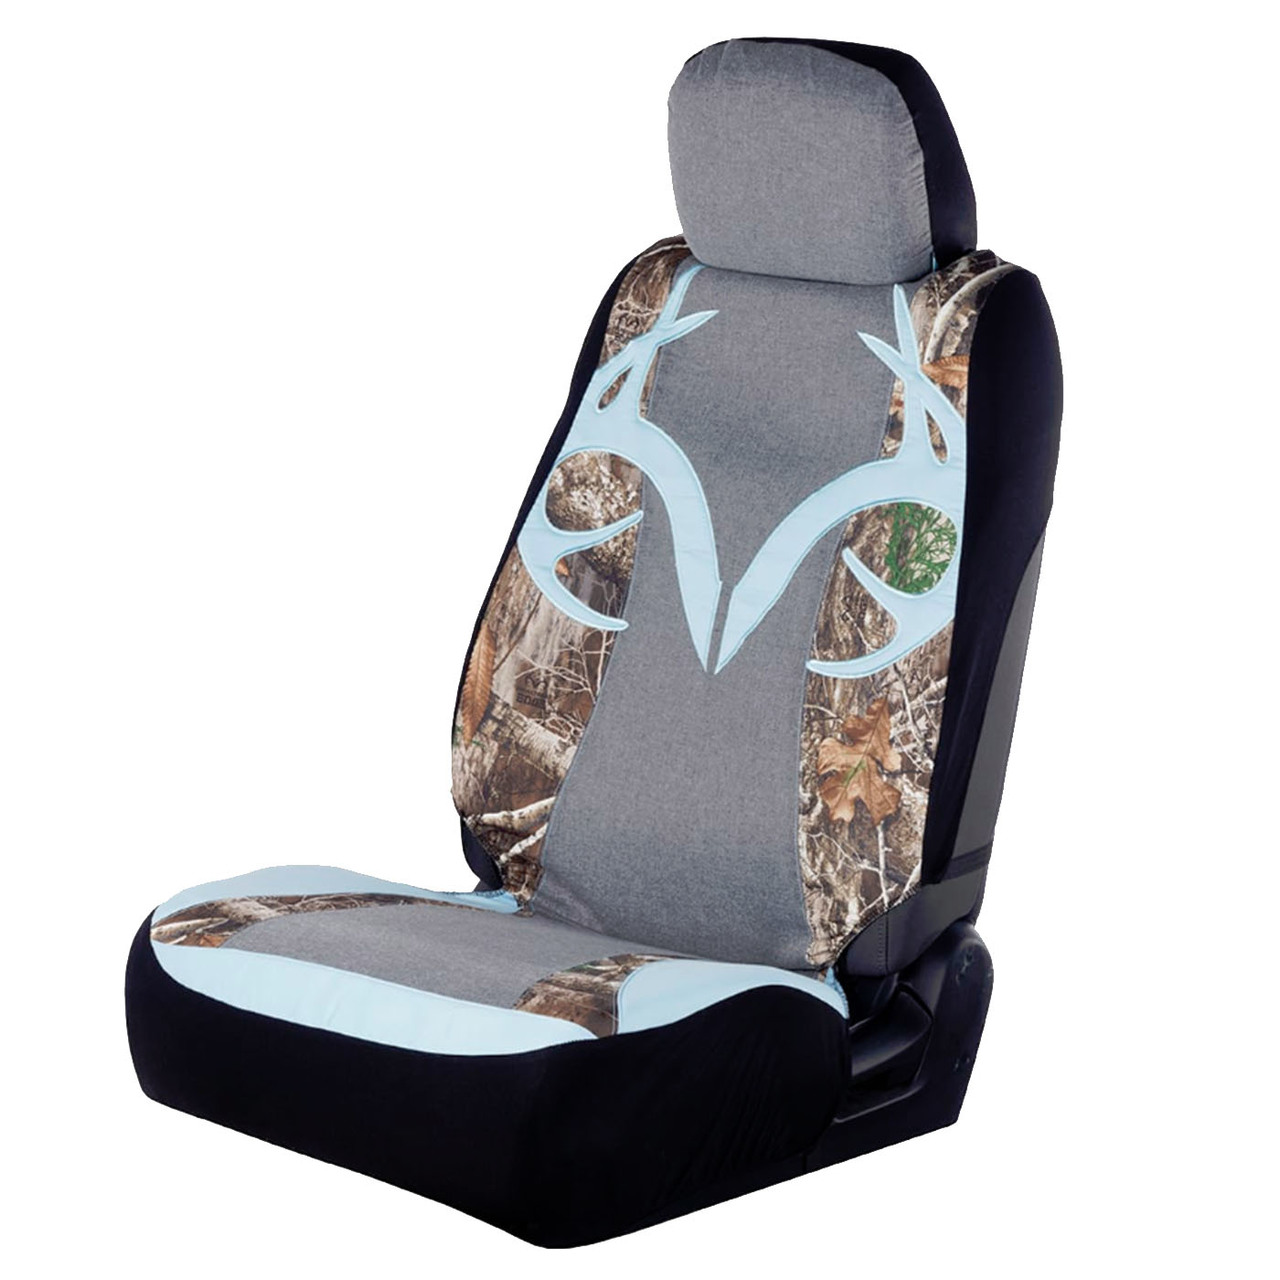 Realtree Low Back Seat Cover | Realtree Camo Seat Covers